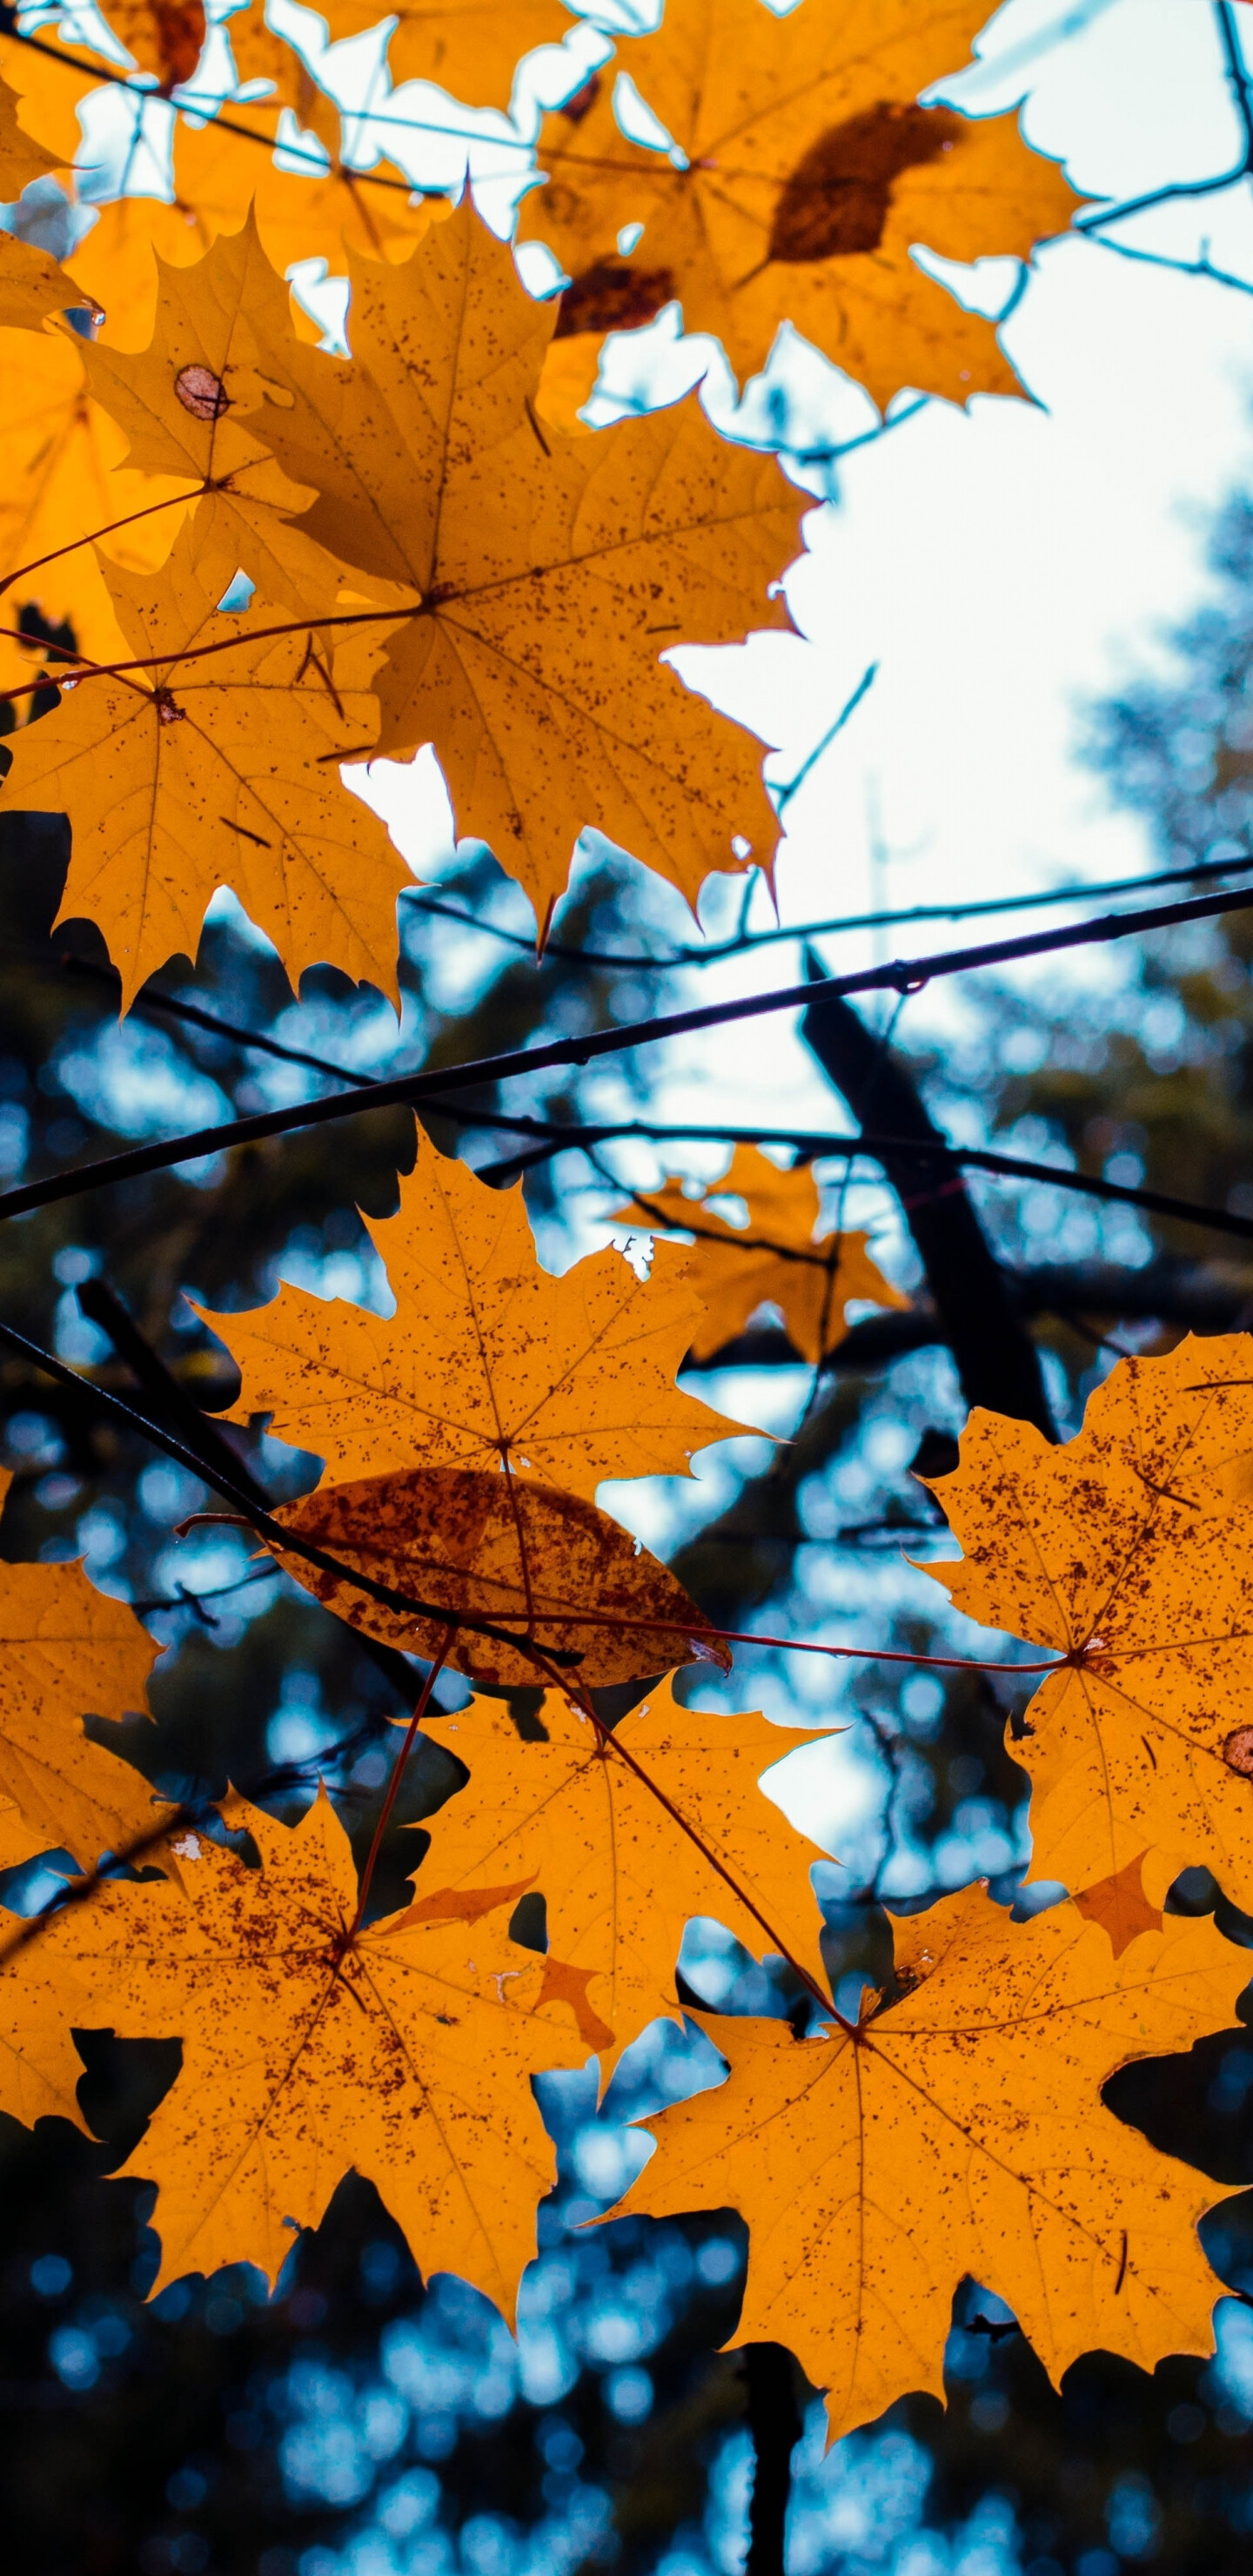 Autumn: Yellowish color of maple leaves, Fall foliage. 1440x2960 HD Background.